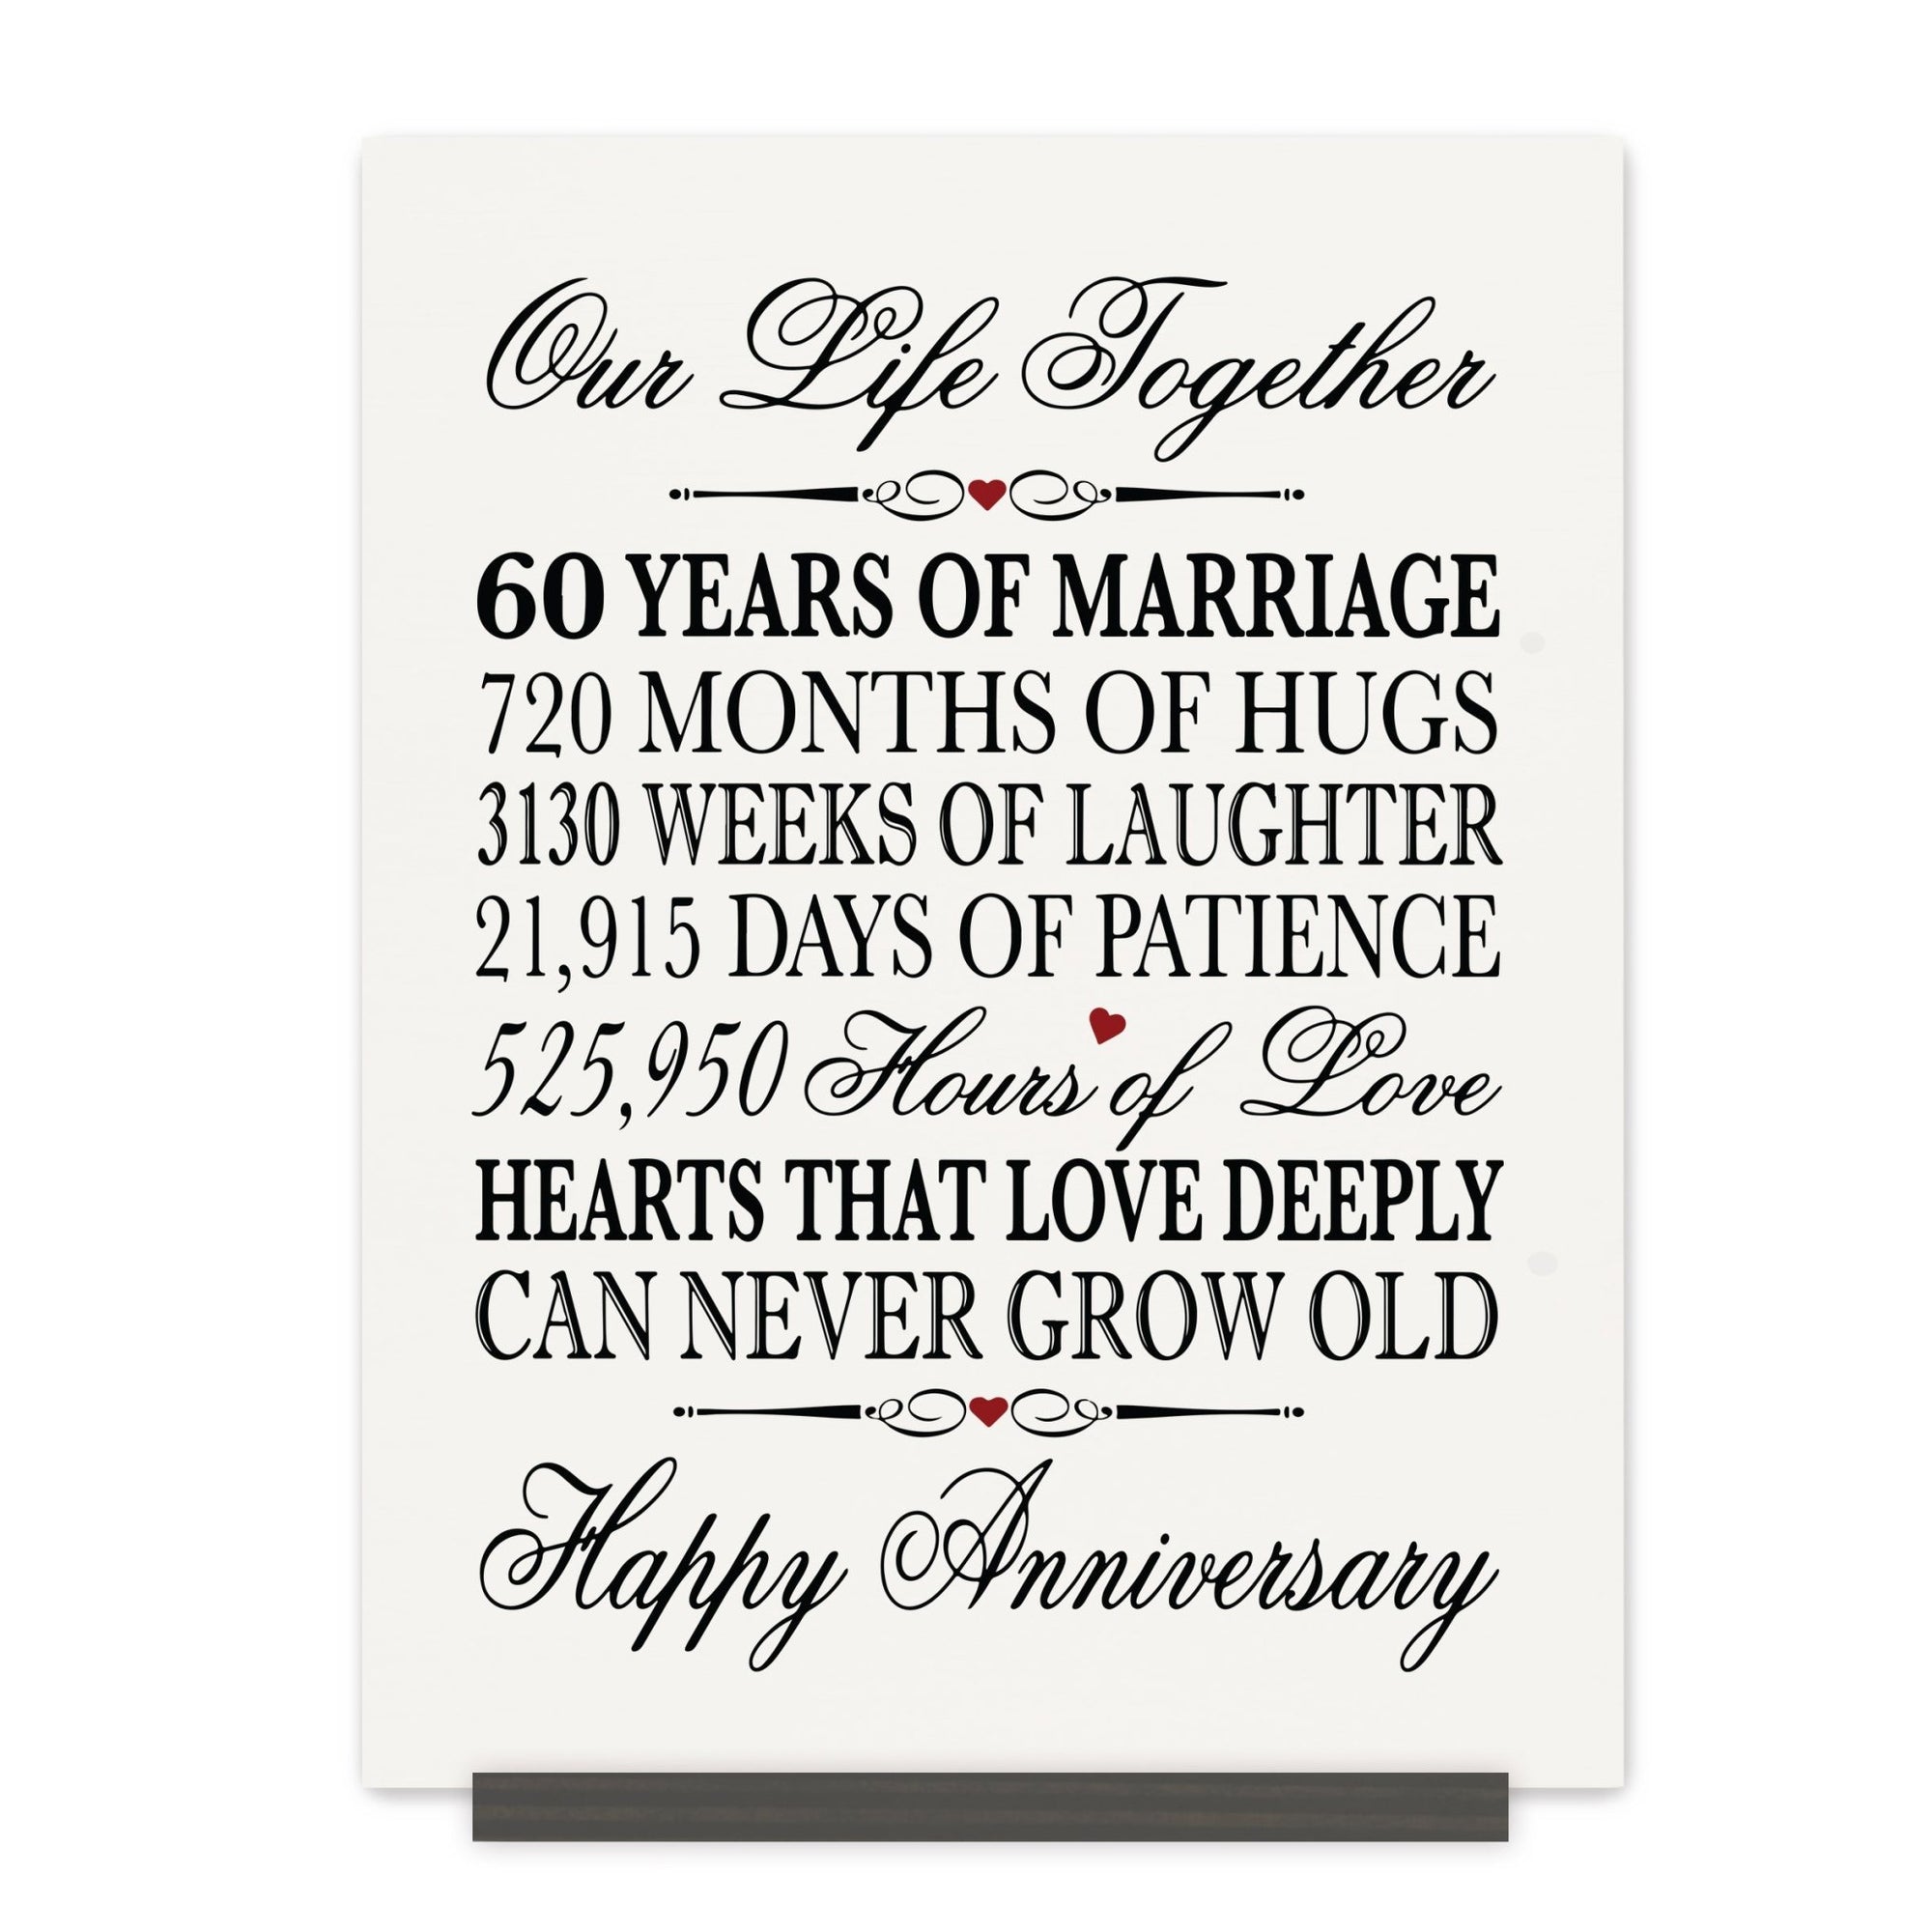 60th Wedding Anniversary Wall Plaque - Our Life Together - LifeSong Milestones